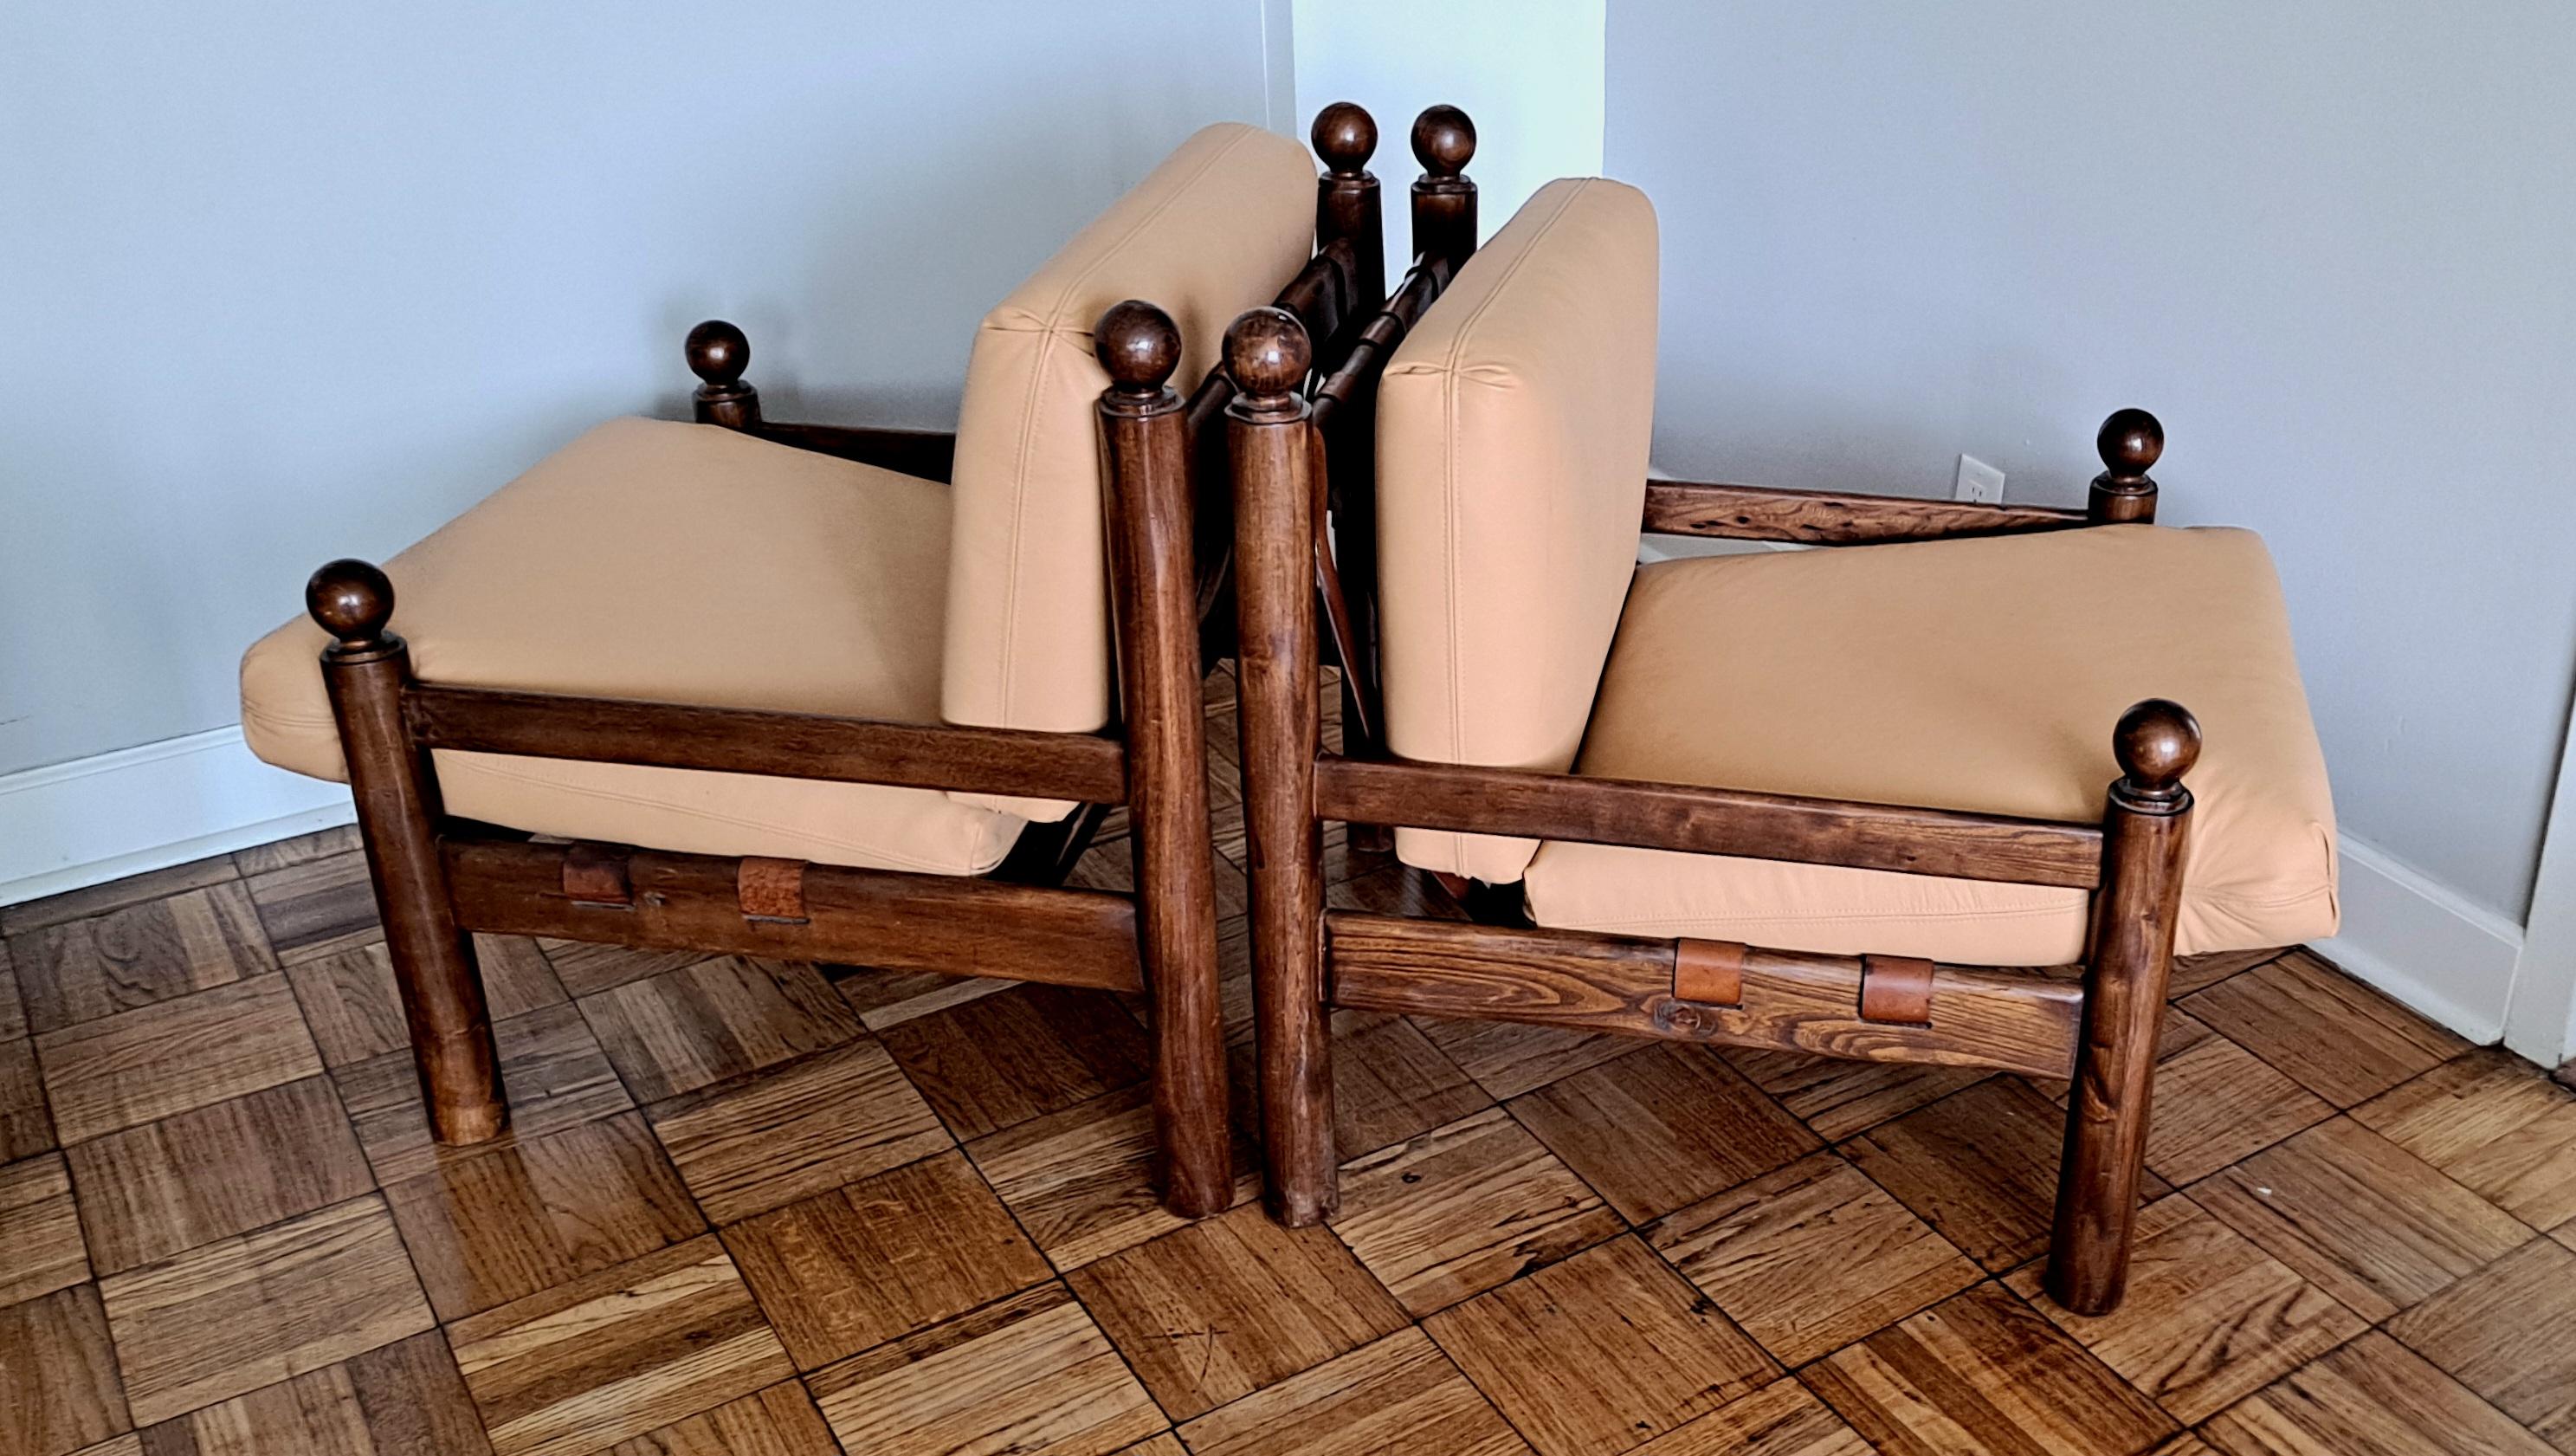 Sergio Rodriguez furniture designer from 1950s - 1970s He was known for his unique design which combine traditional Spanish wood work with the modern forms and material.This chairs are sculptural wood frame and leather seat and back rest.He work